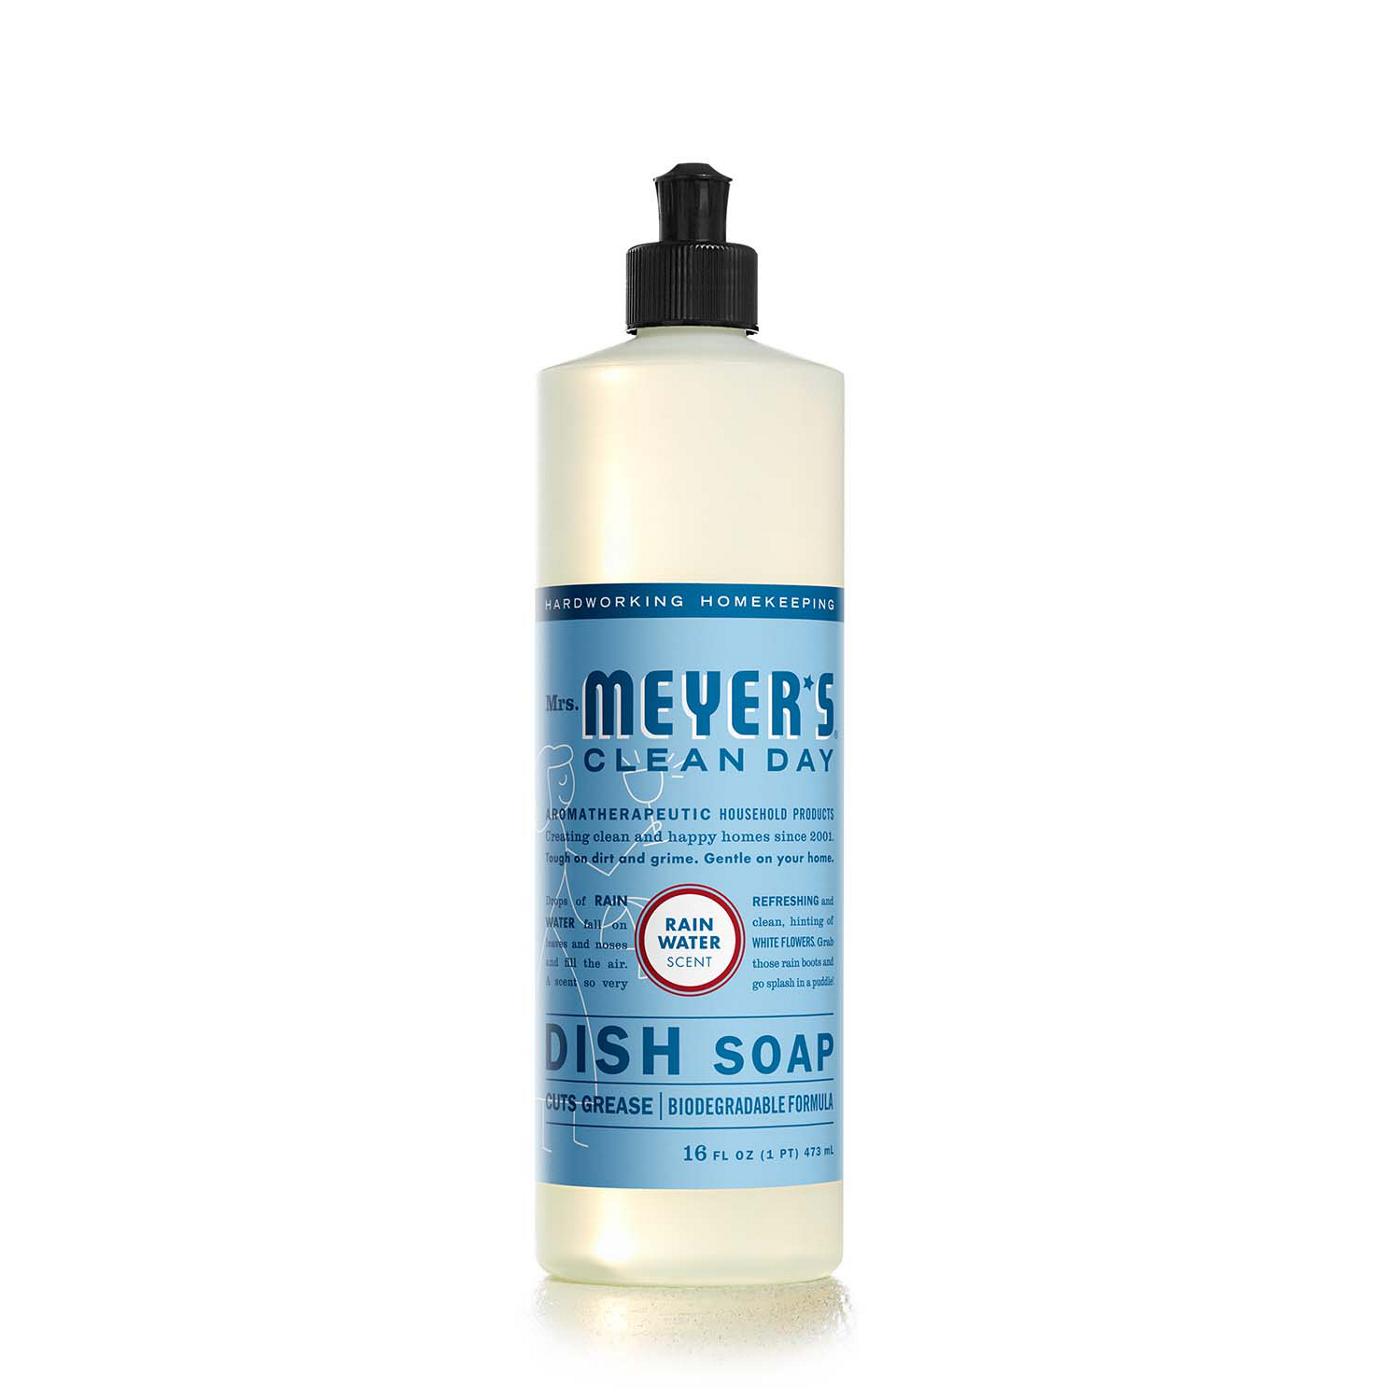 Mrs. Meyer's Clean Day Rainwater Dish Soap; image 1 of 6